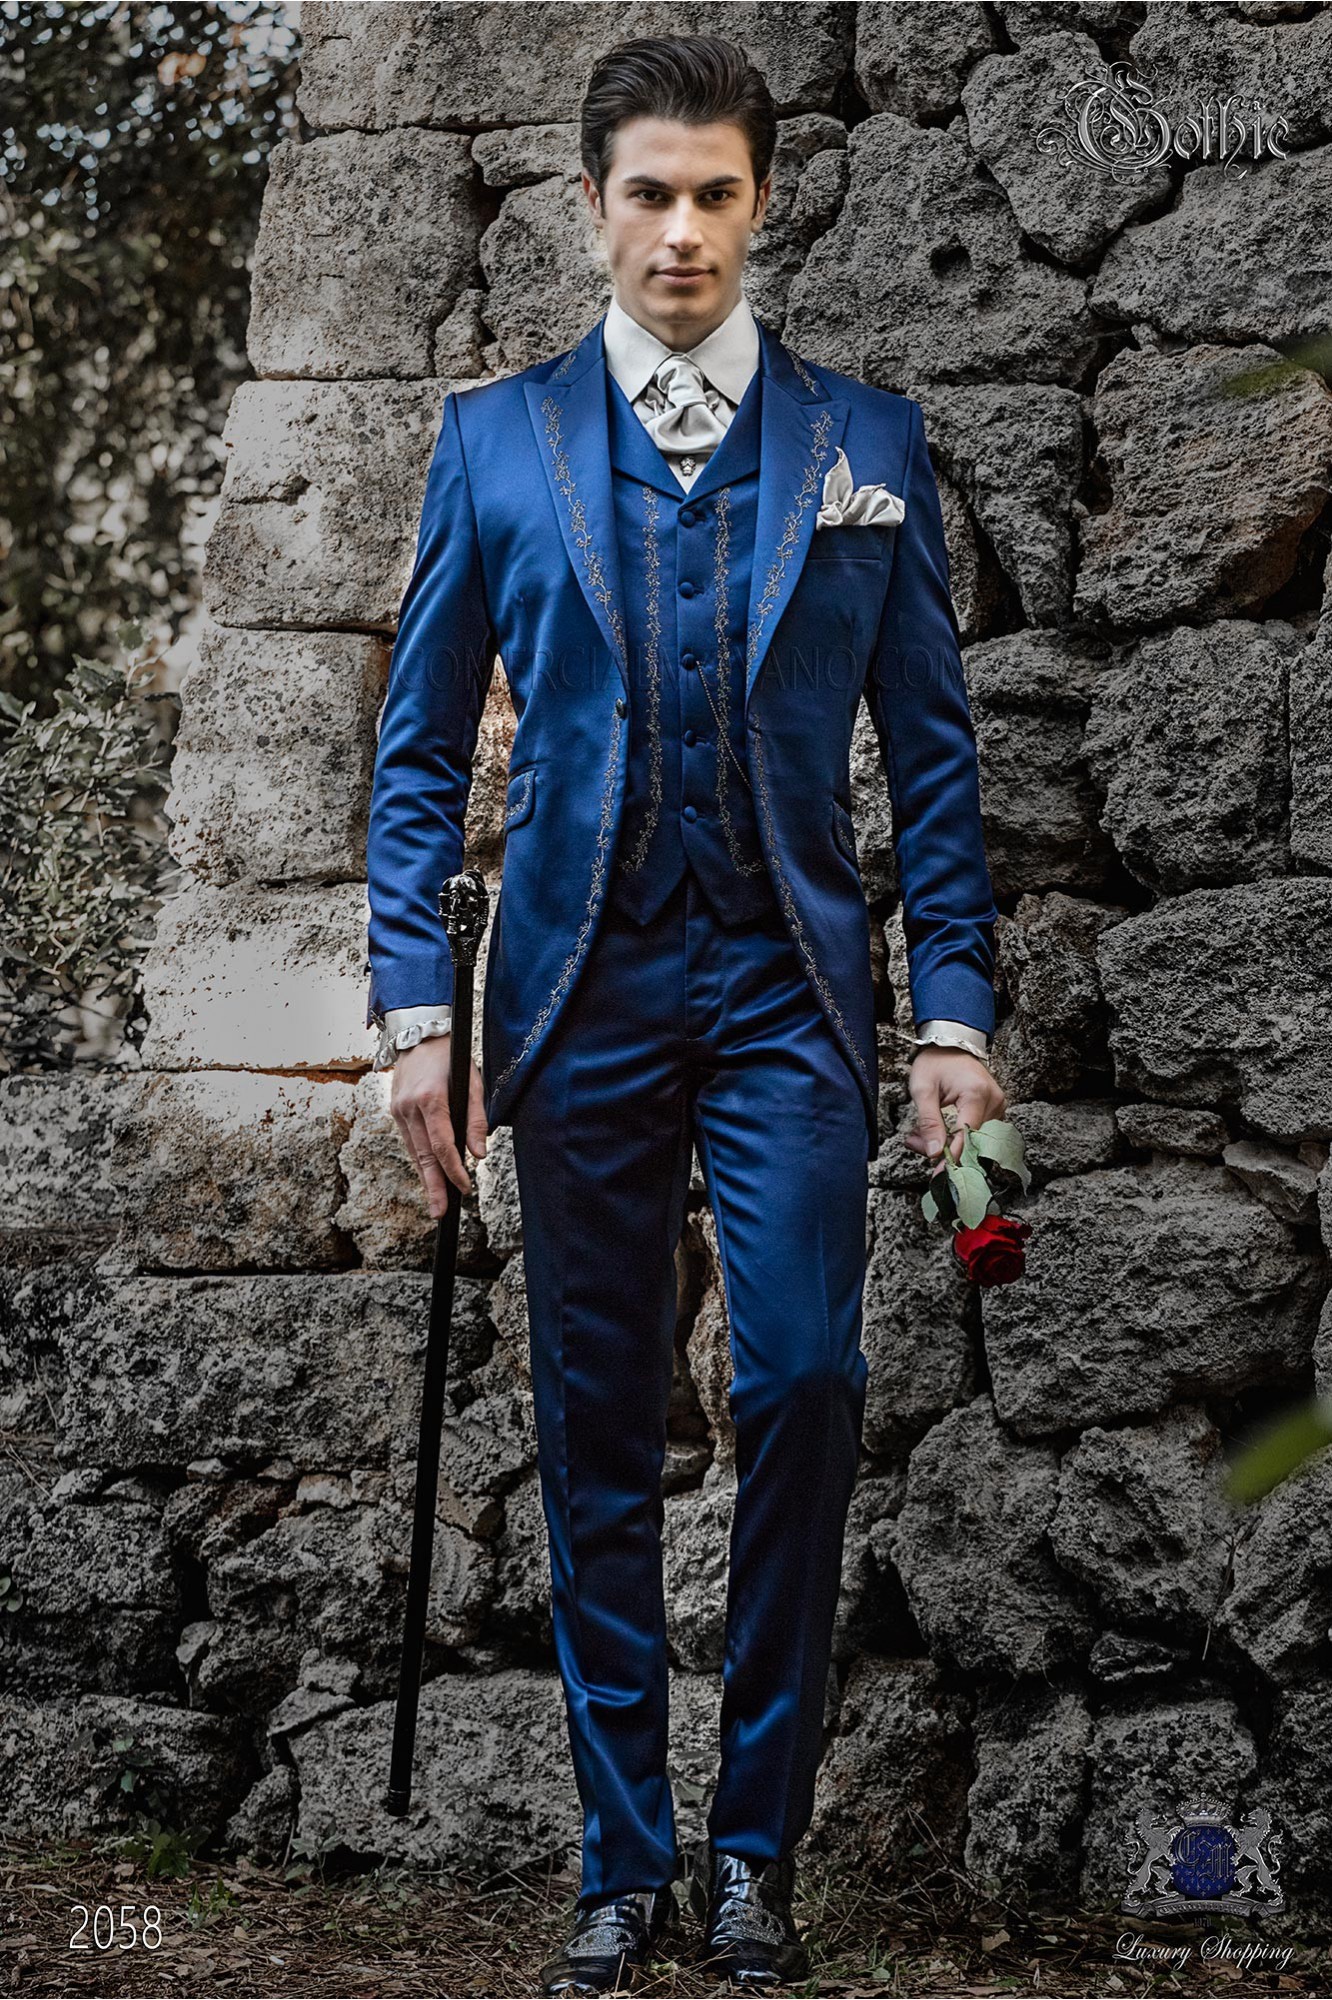 vintage frock coat in blue satin fabric with silver embroidery and crystal clasp model 2058 Mario Moyano